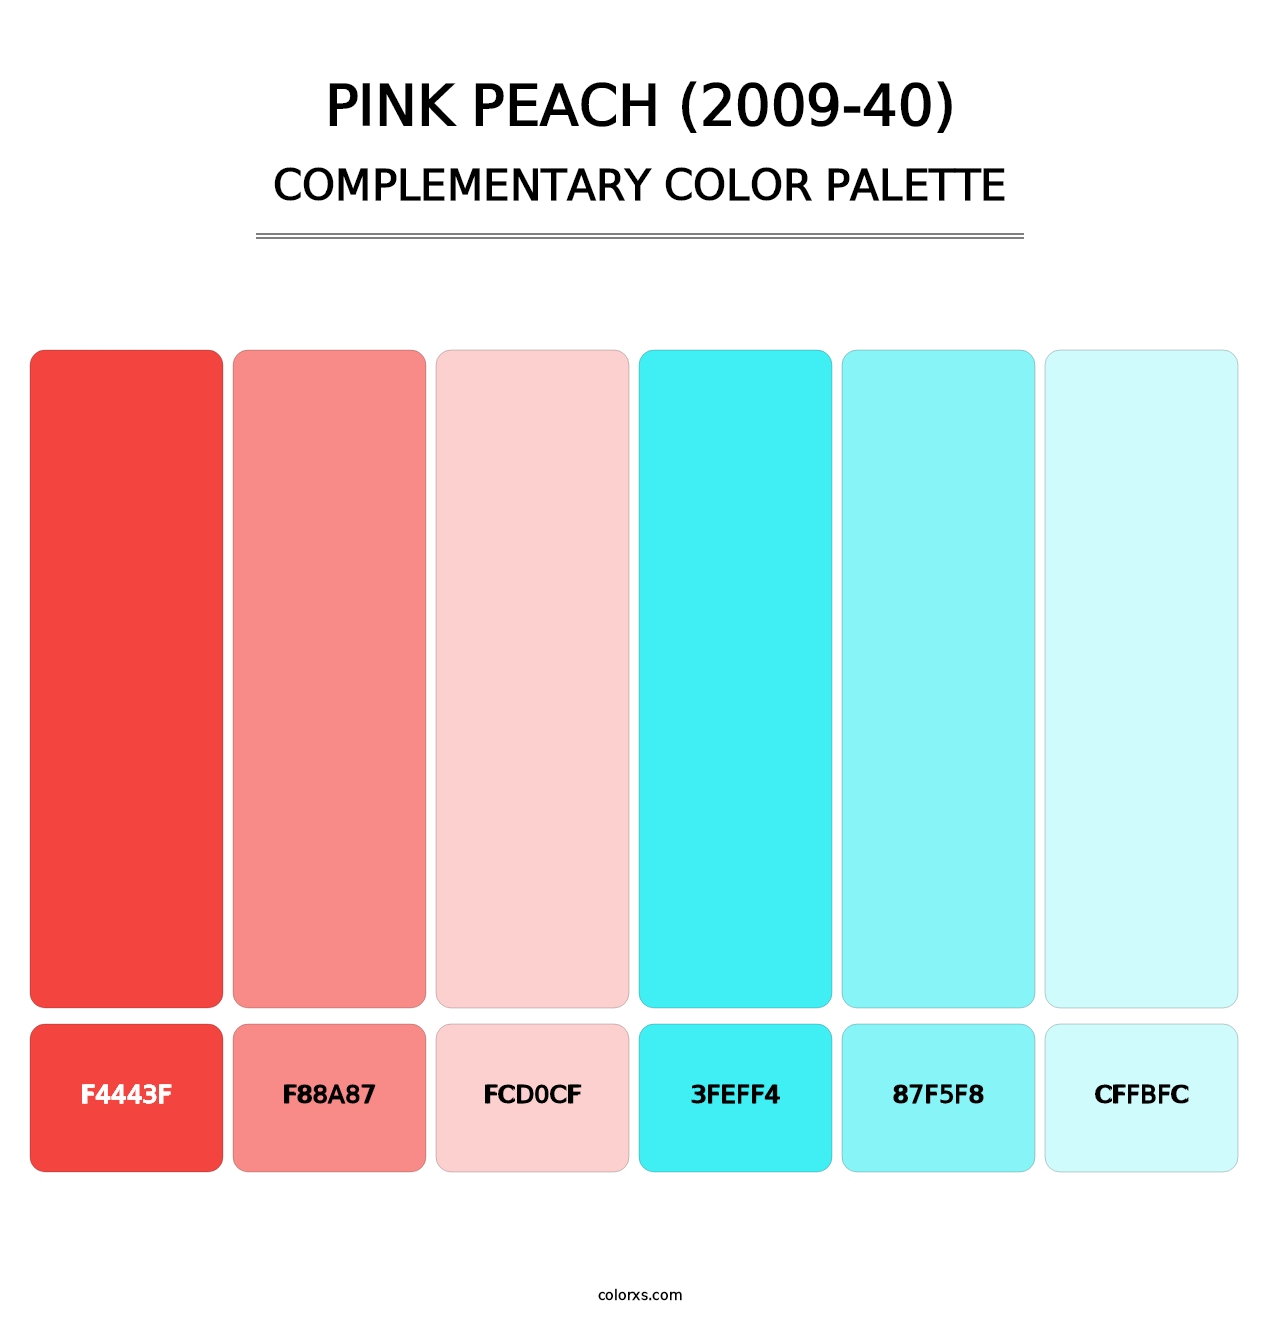 Pink Peach (2009-40) - Complementary Color Palette